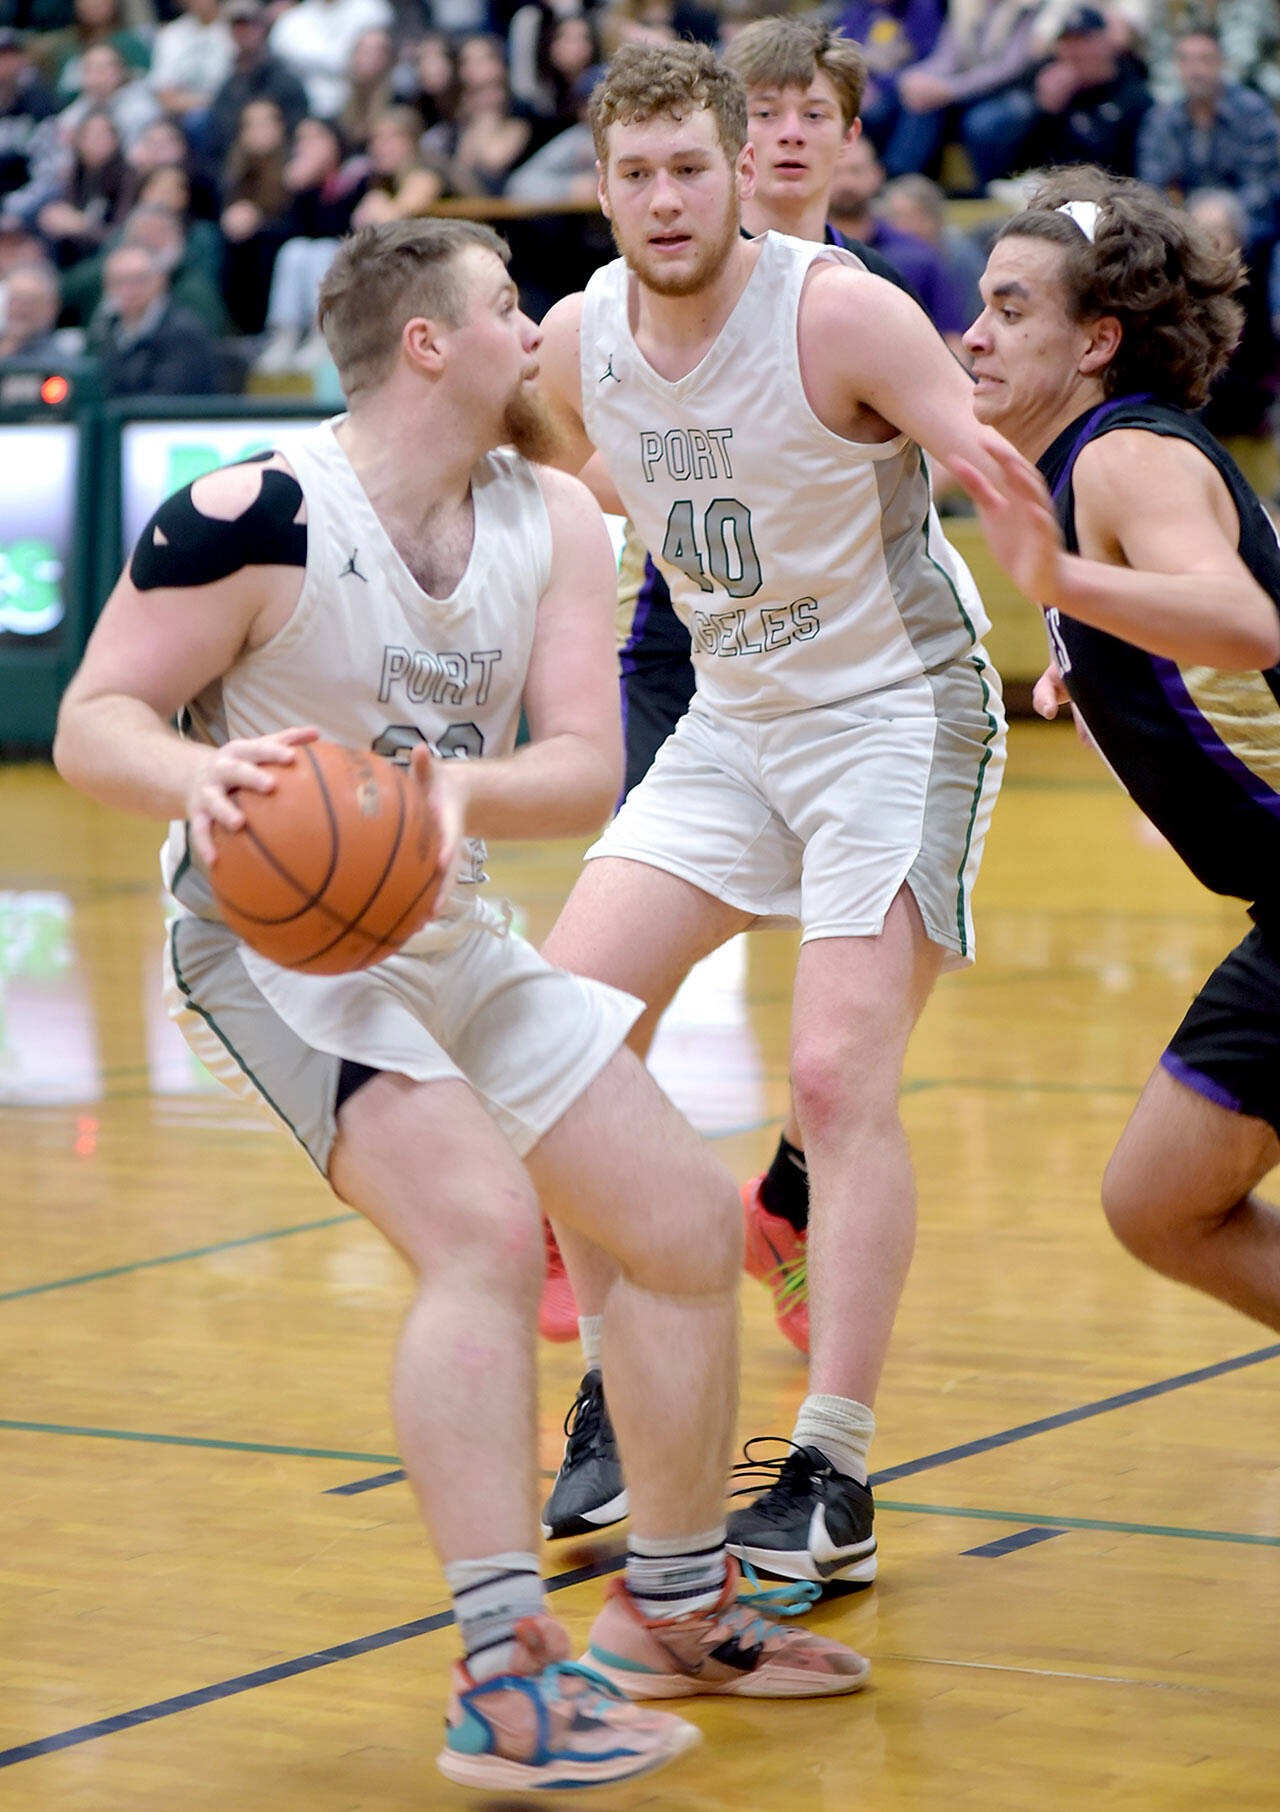 KEITH THORPE/PENINSULA DAILY NEWS 
Port Angeles' Ezra Townsend, left, looks for an opening as teammate Isaiah Shamp, center, holds off Sequim's Lars Wiker on Tuesday in Port Angeles.